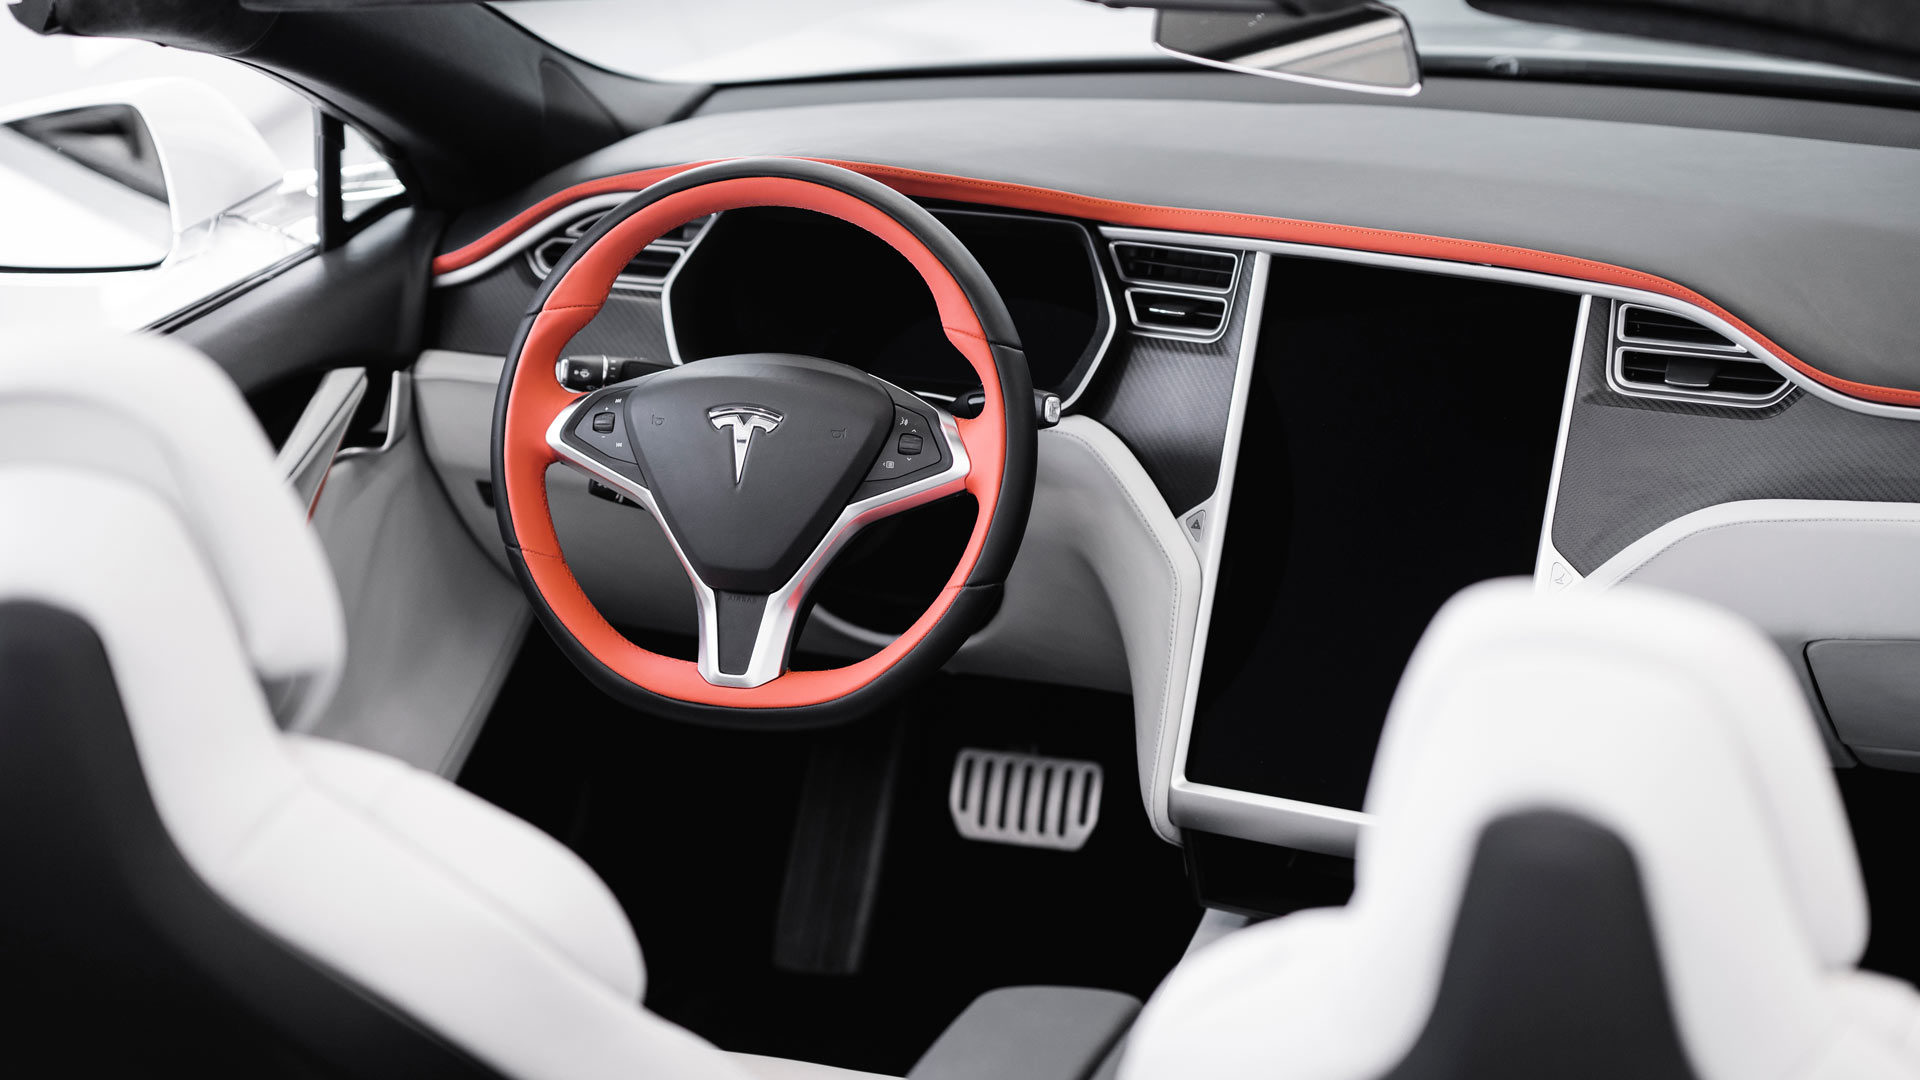 Ares Tesla Model S Convertible